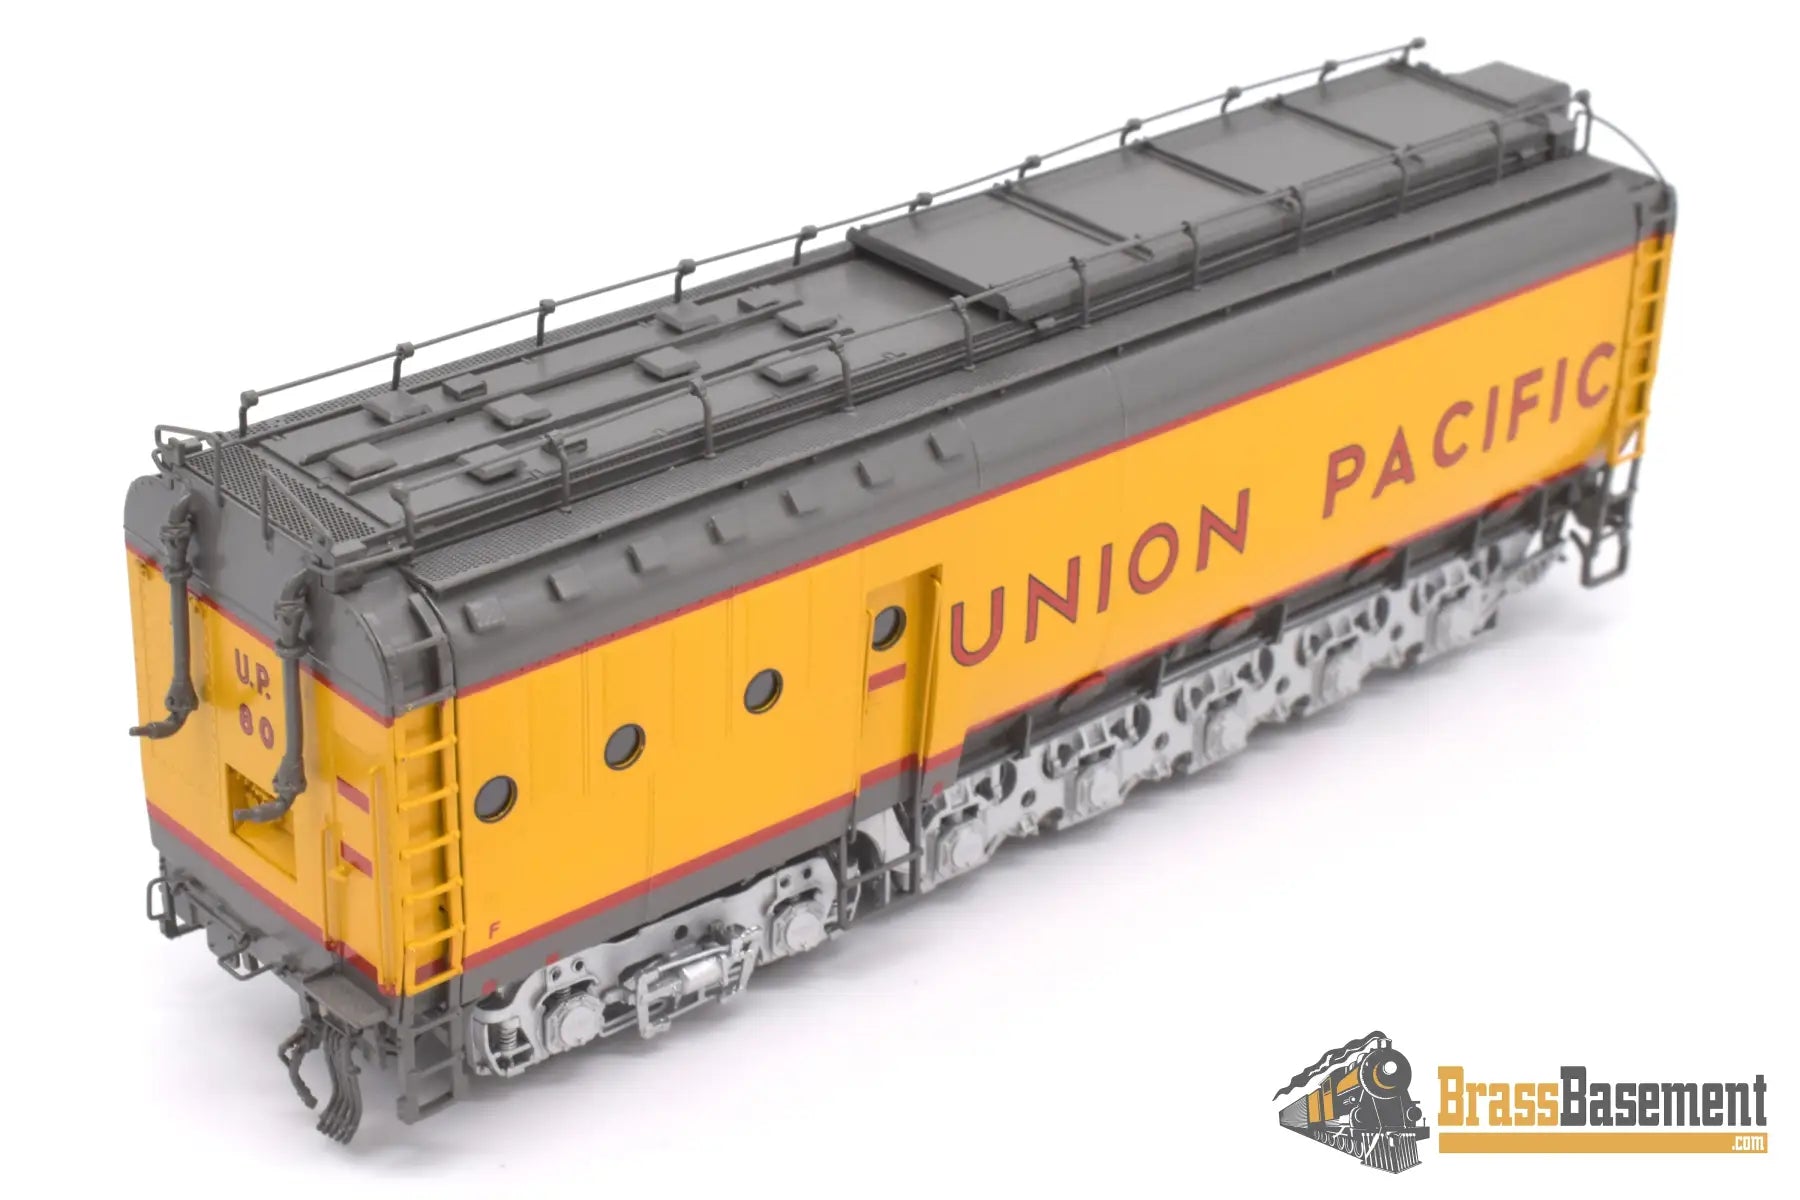 Ho Brass - Omi 5096.1 Overland Union Pacific Up #80/8080 Coal Turbine 3 Unit Set Factory Painted